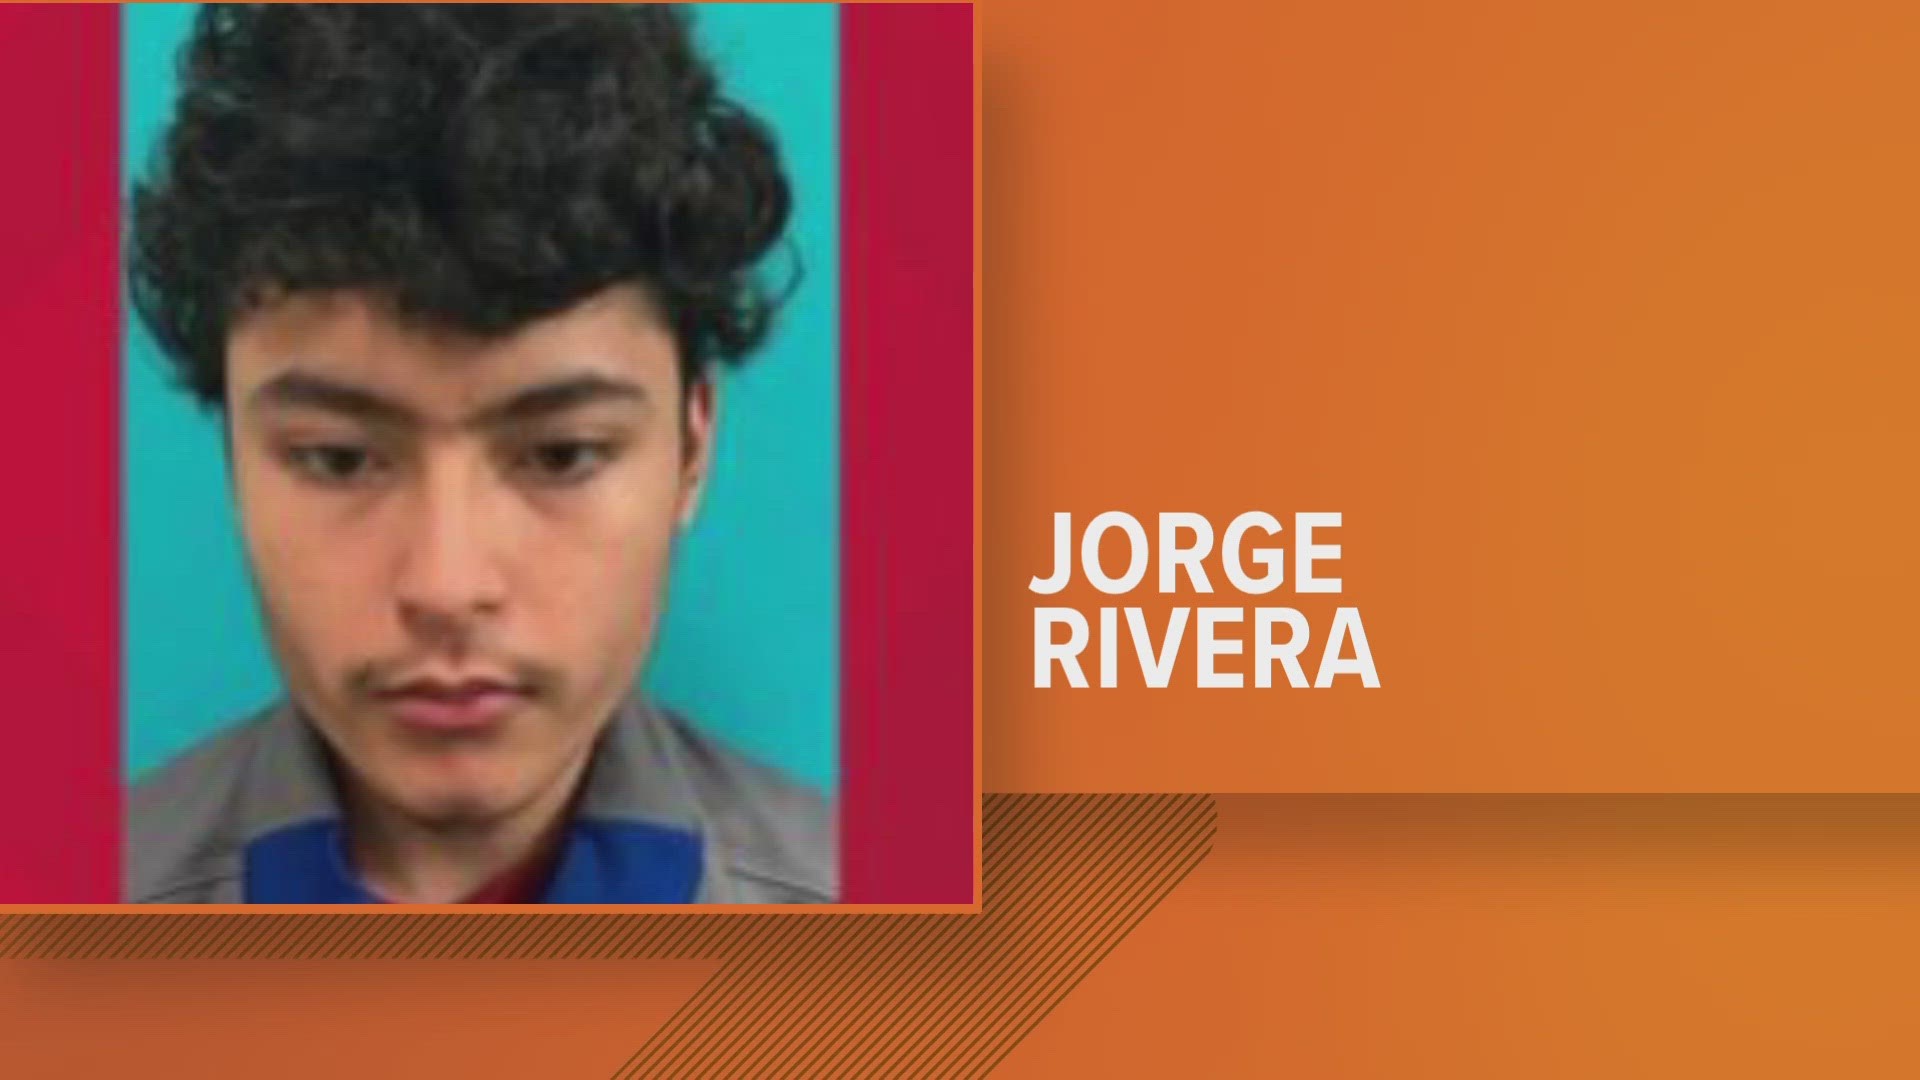 Jorge Rivera was arrested in connection with two attempted kidnappings that happened last week.